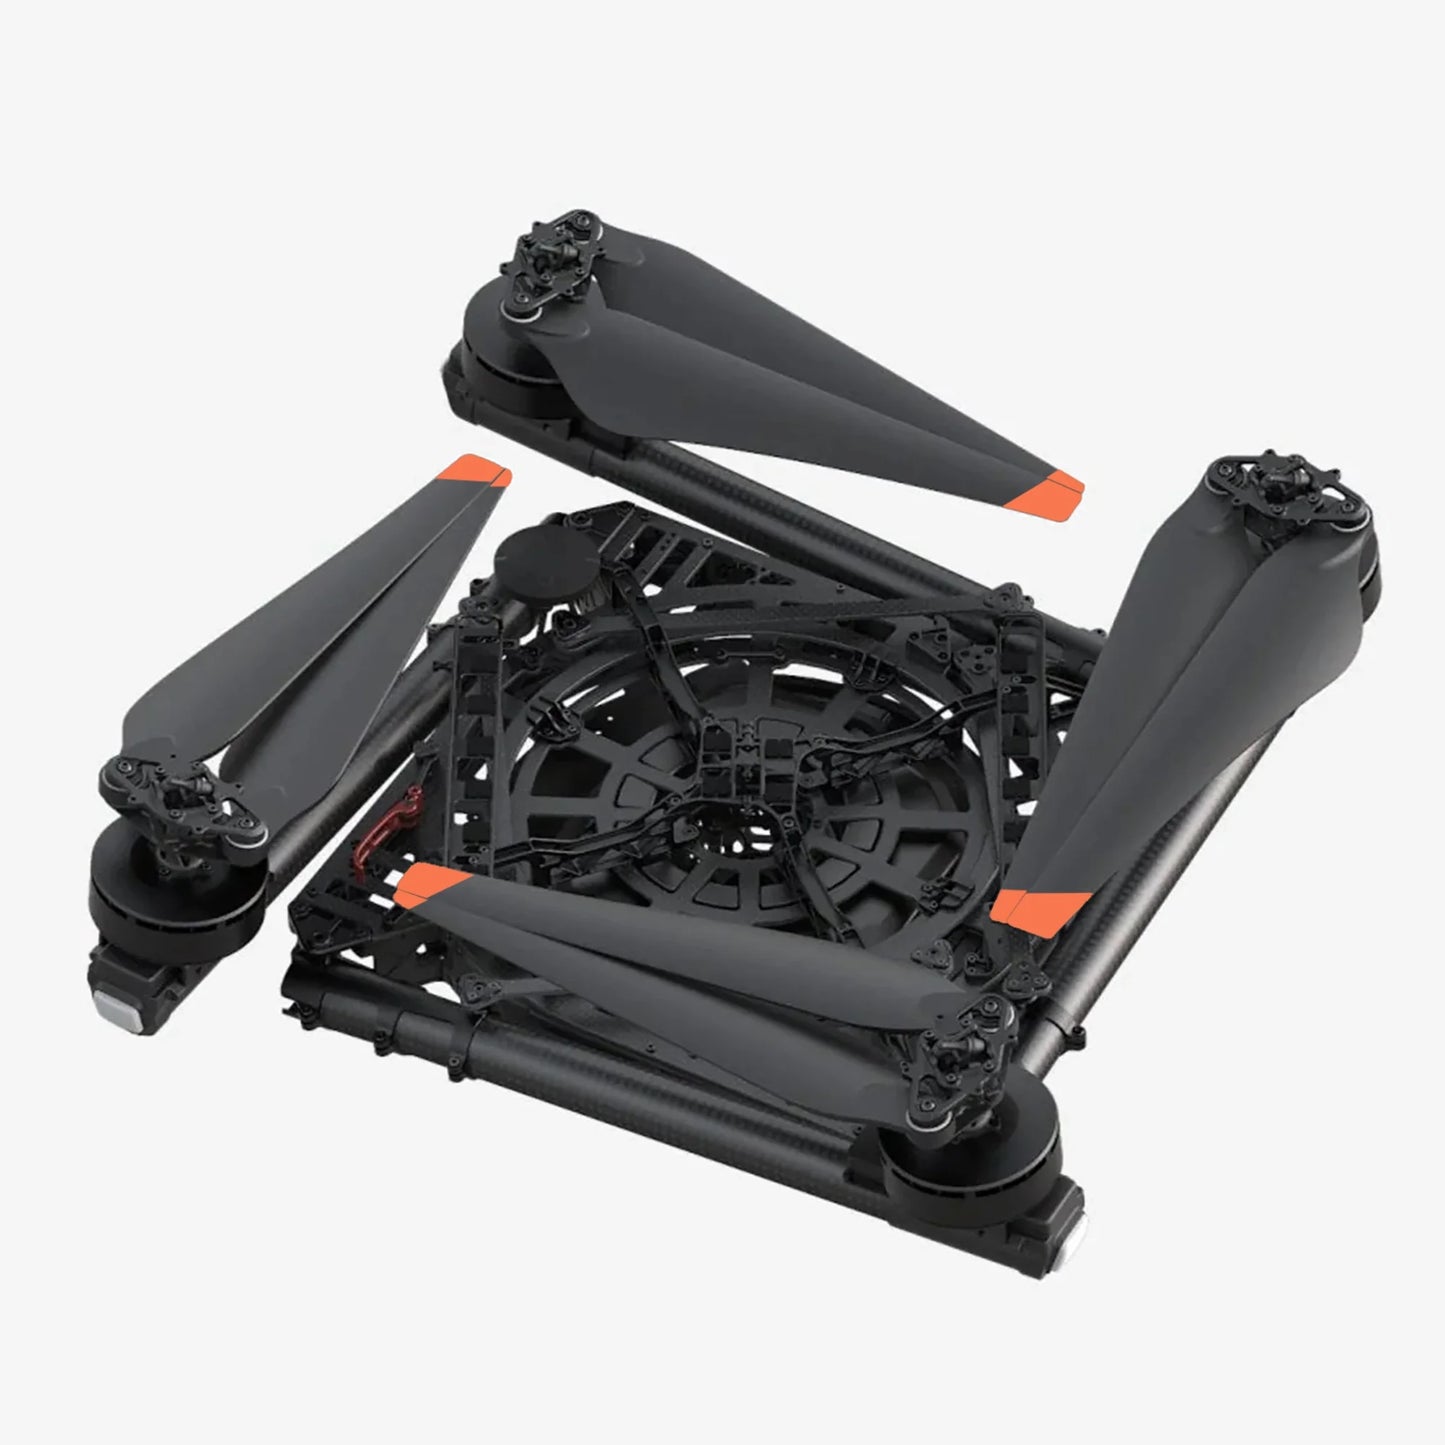 950-00118-01 Freefly Alta X (No Case, Not Gimbal Ready, Aircraft Only)